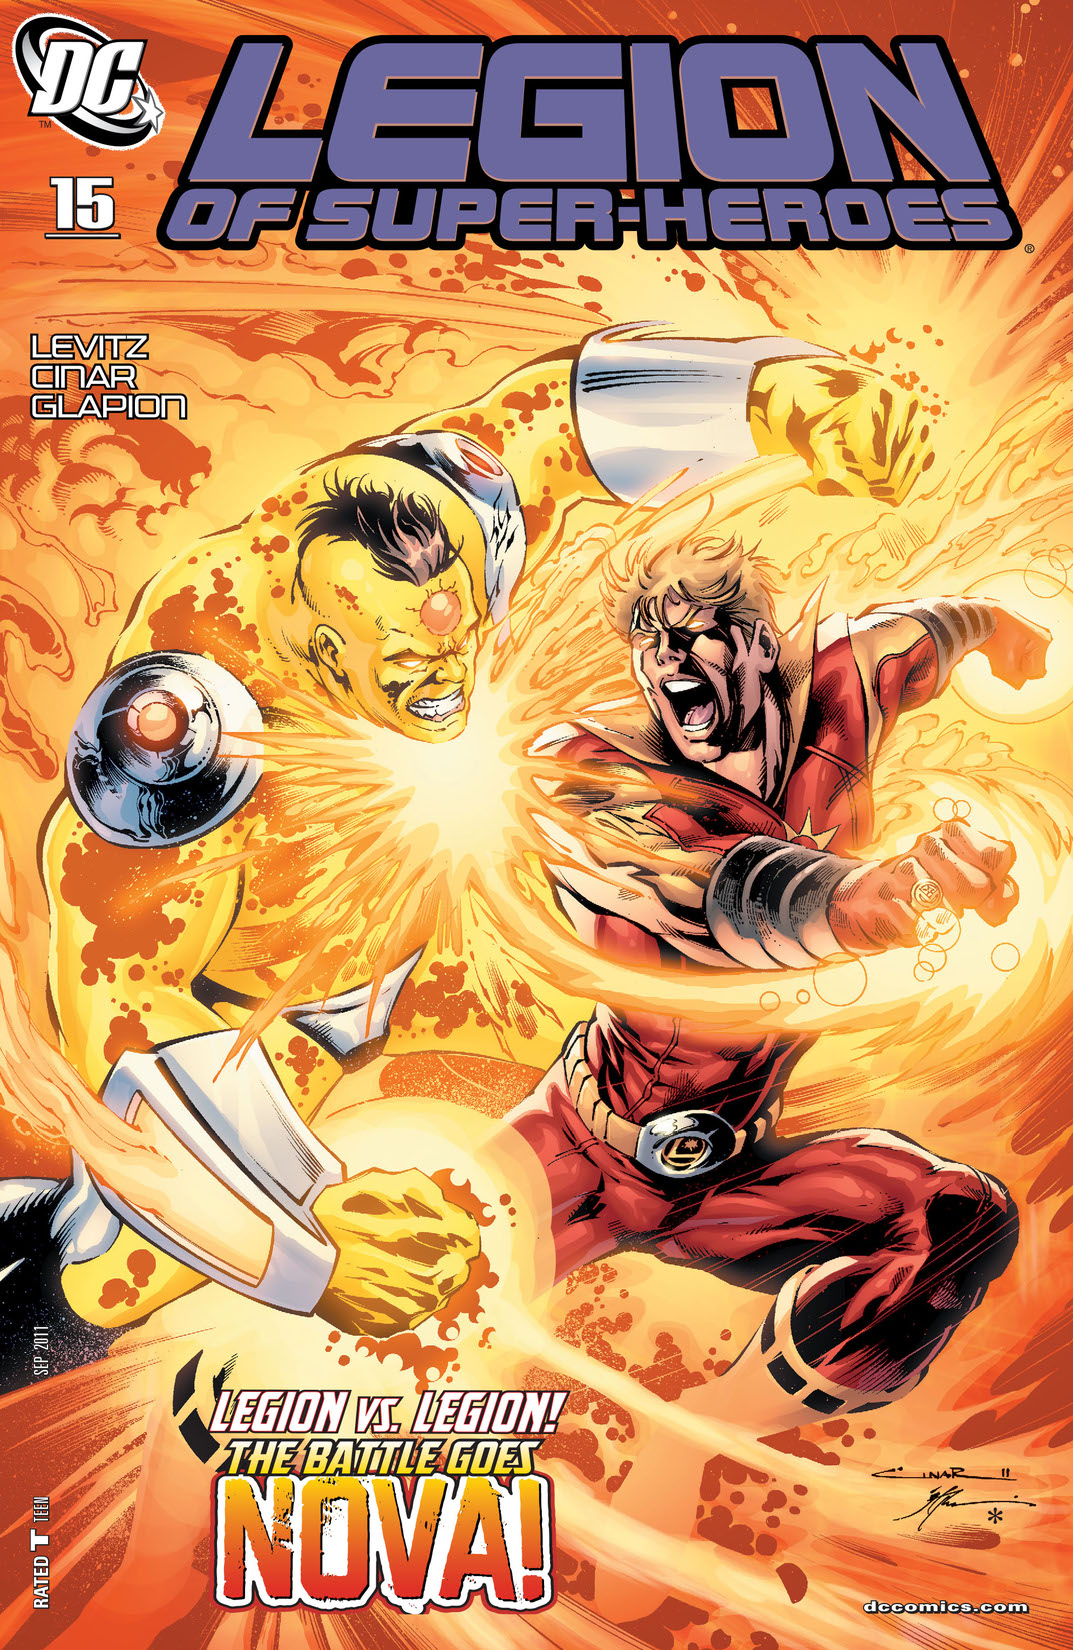 Legion of Super-Heroes (2010-) #15 preview images